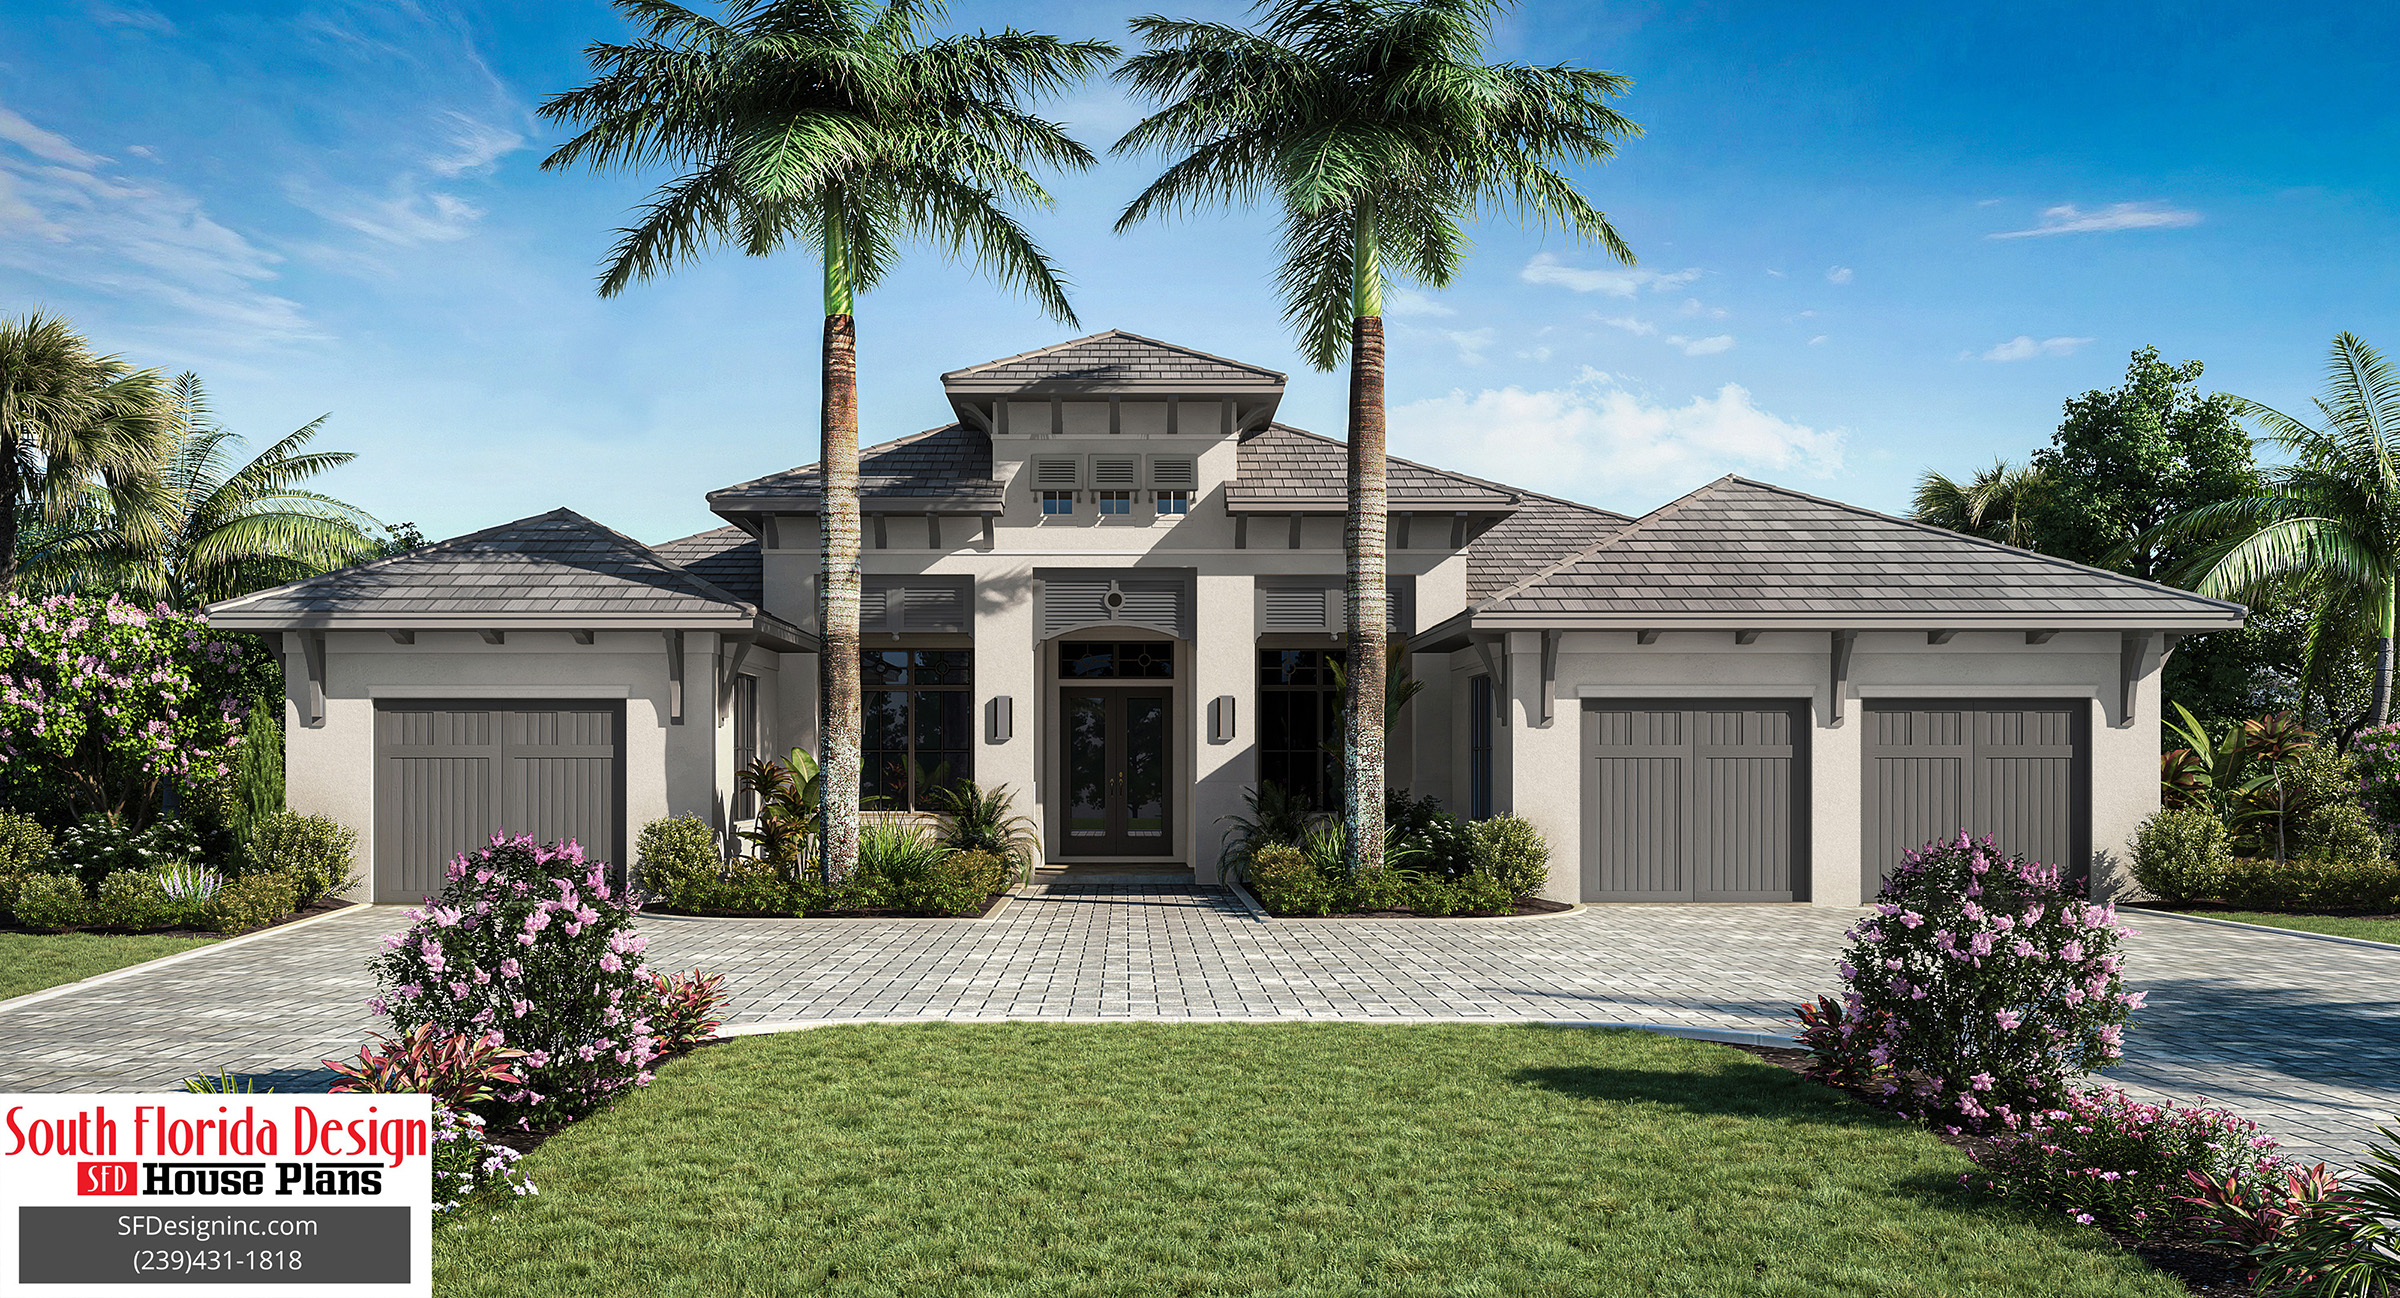 Color front elevation rendering of 1-story 3785sf coastal house plan